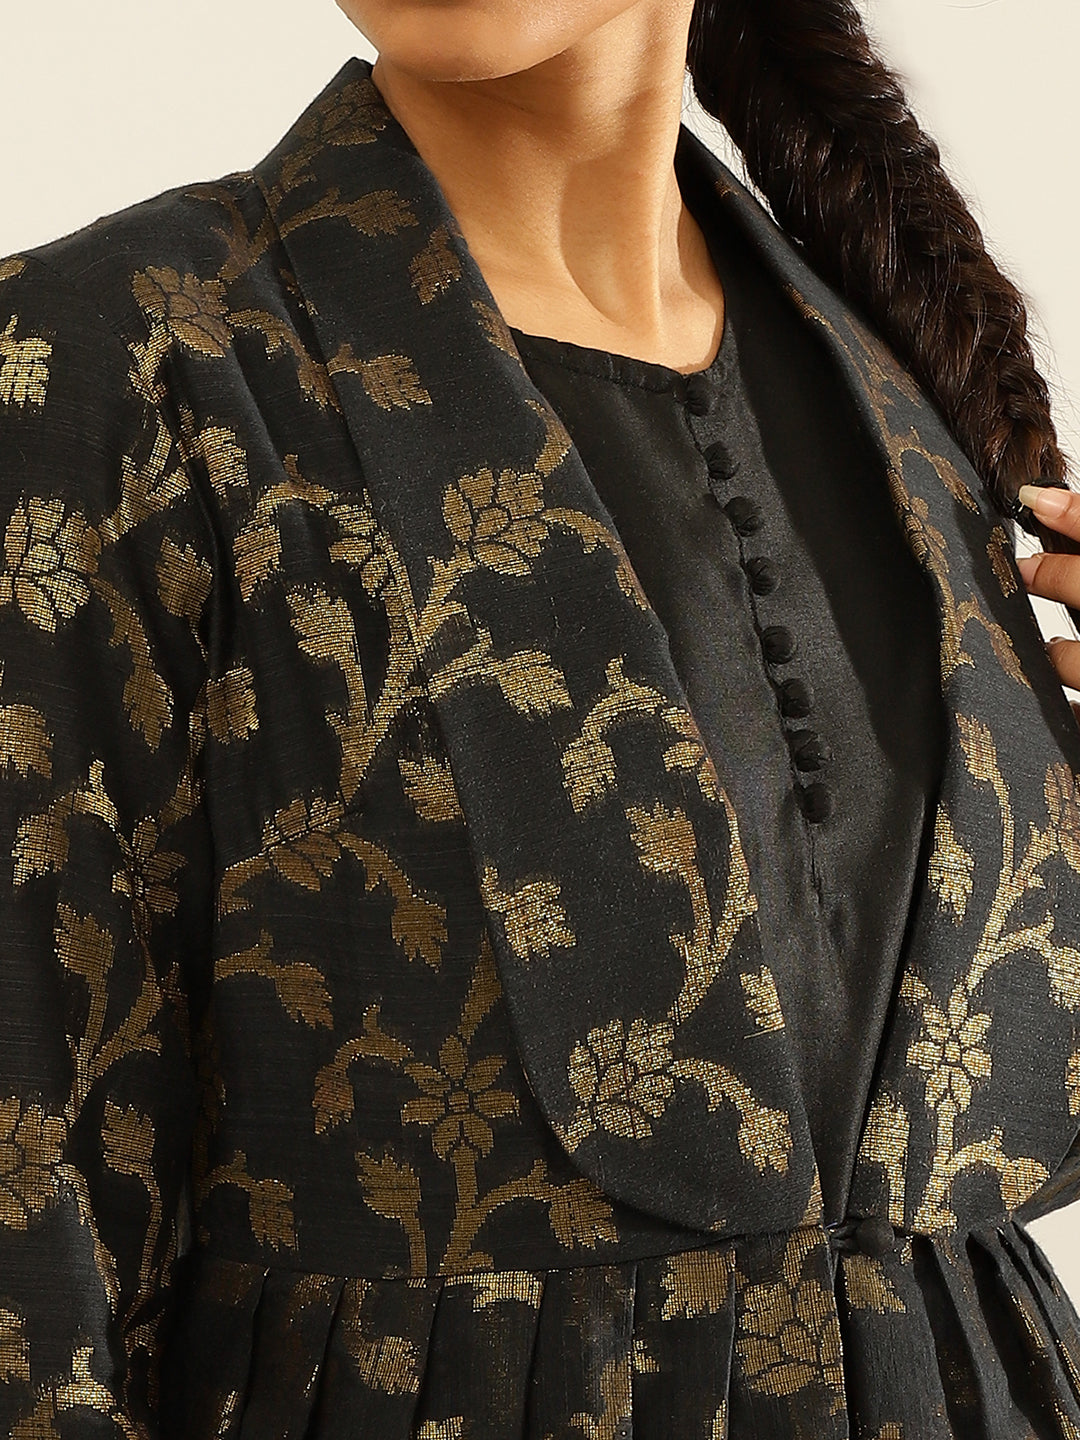 Cotton zari baswada circular jacket & top paired with trouser